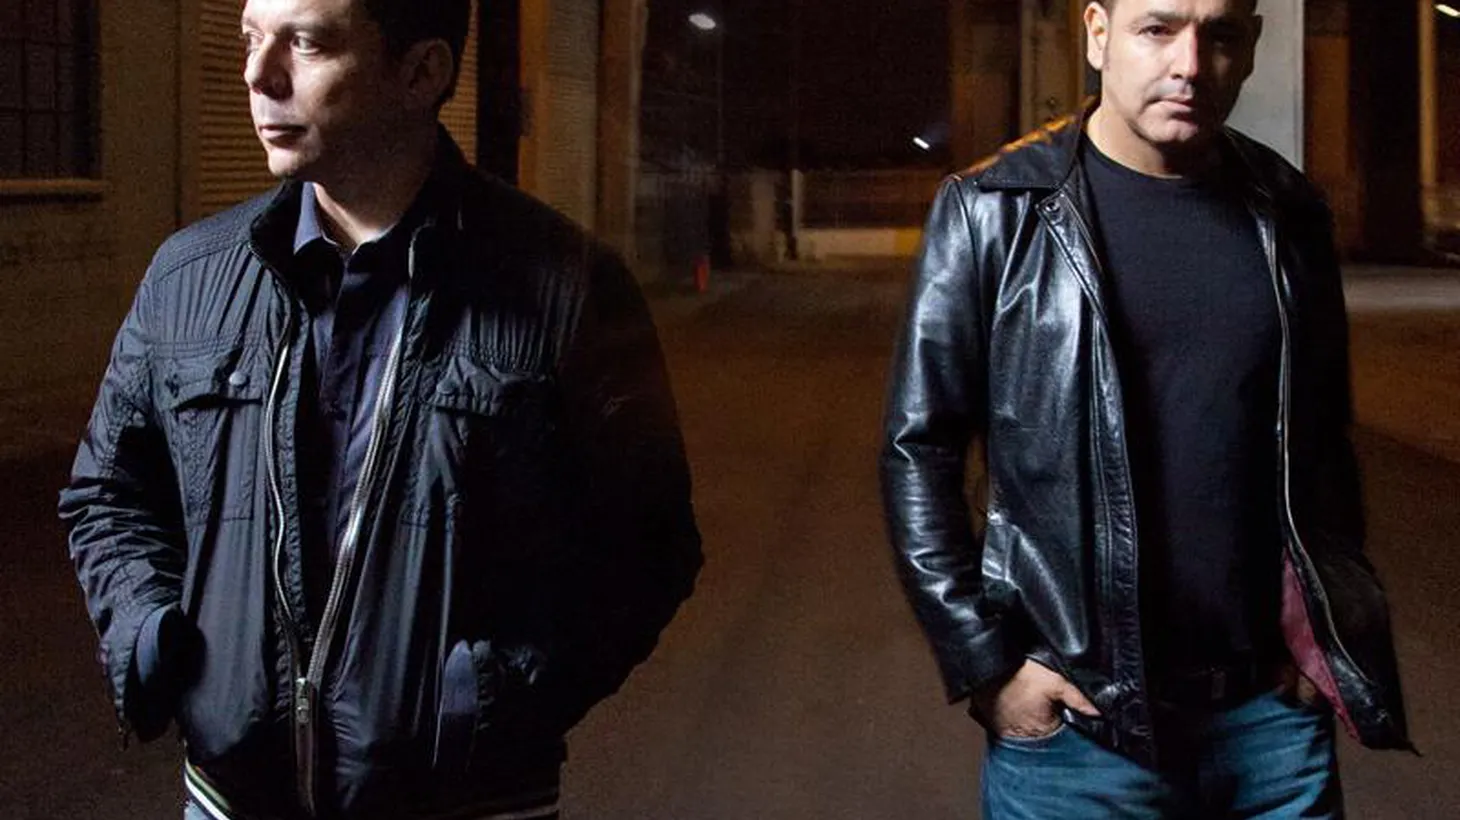 Platinum-selling EDM duo Crystal Method will make history in our studios by performing live with a full band for the first time in their 20-year history.